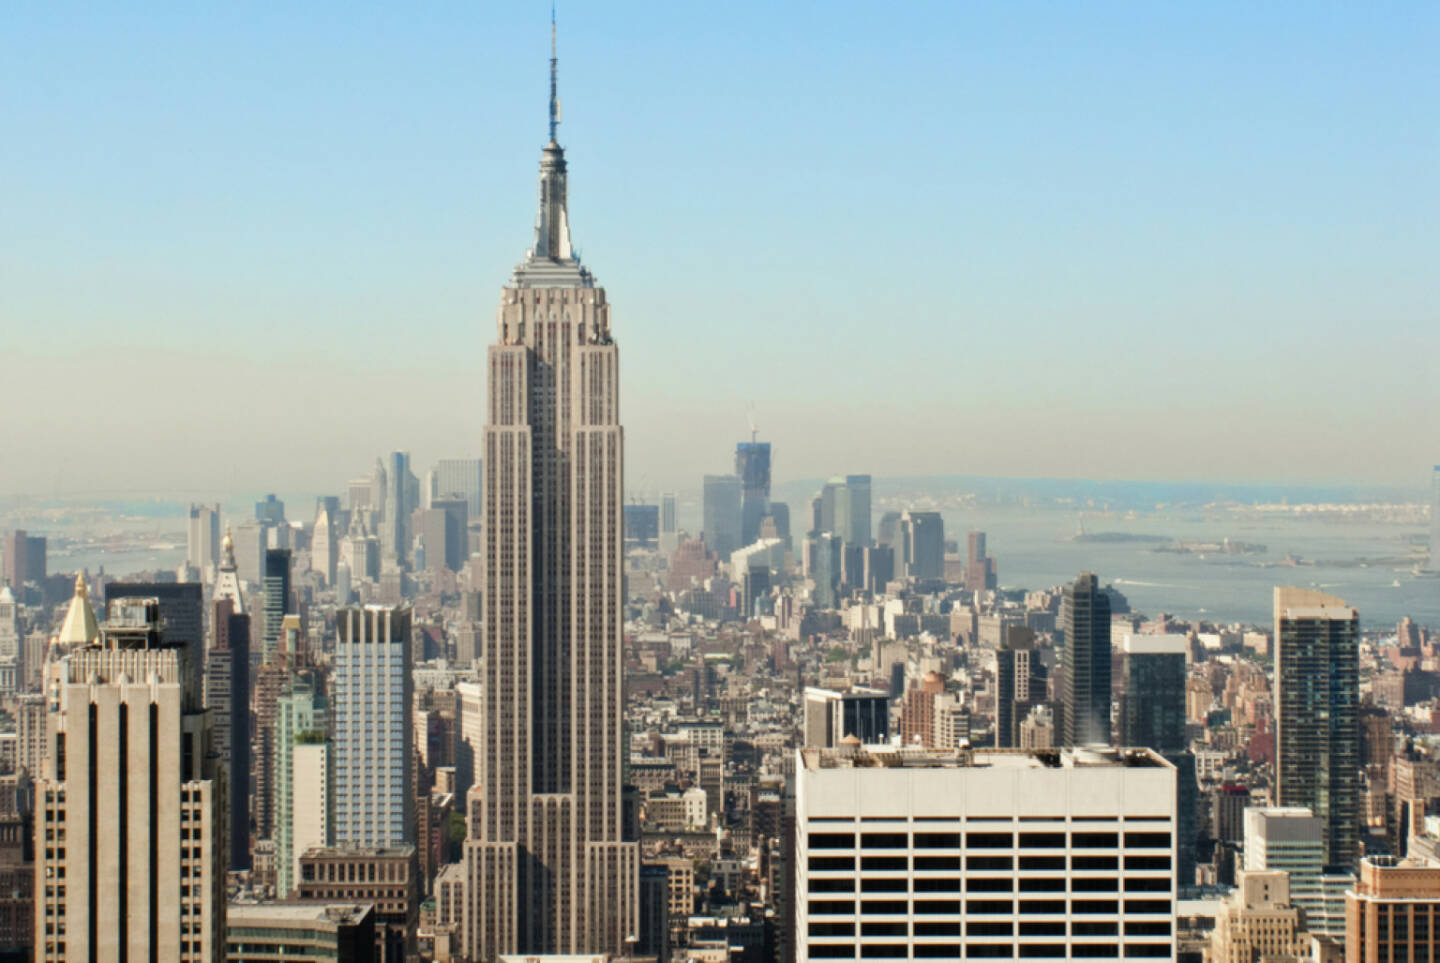 Empire State Building, New York, http://www.shutterstock.com/de/pic-142977907/stock-photo-view-over-the-amazing-skyscrapers-of-manhattan-new-york-city-during-daytime.html 